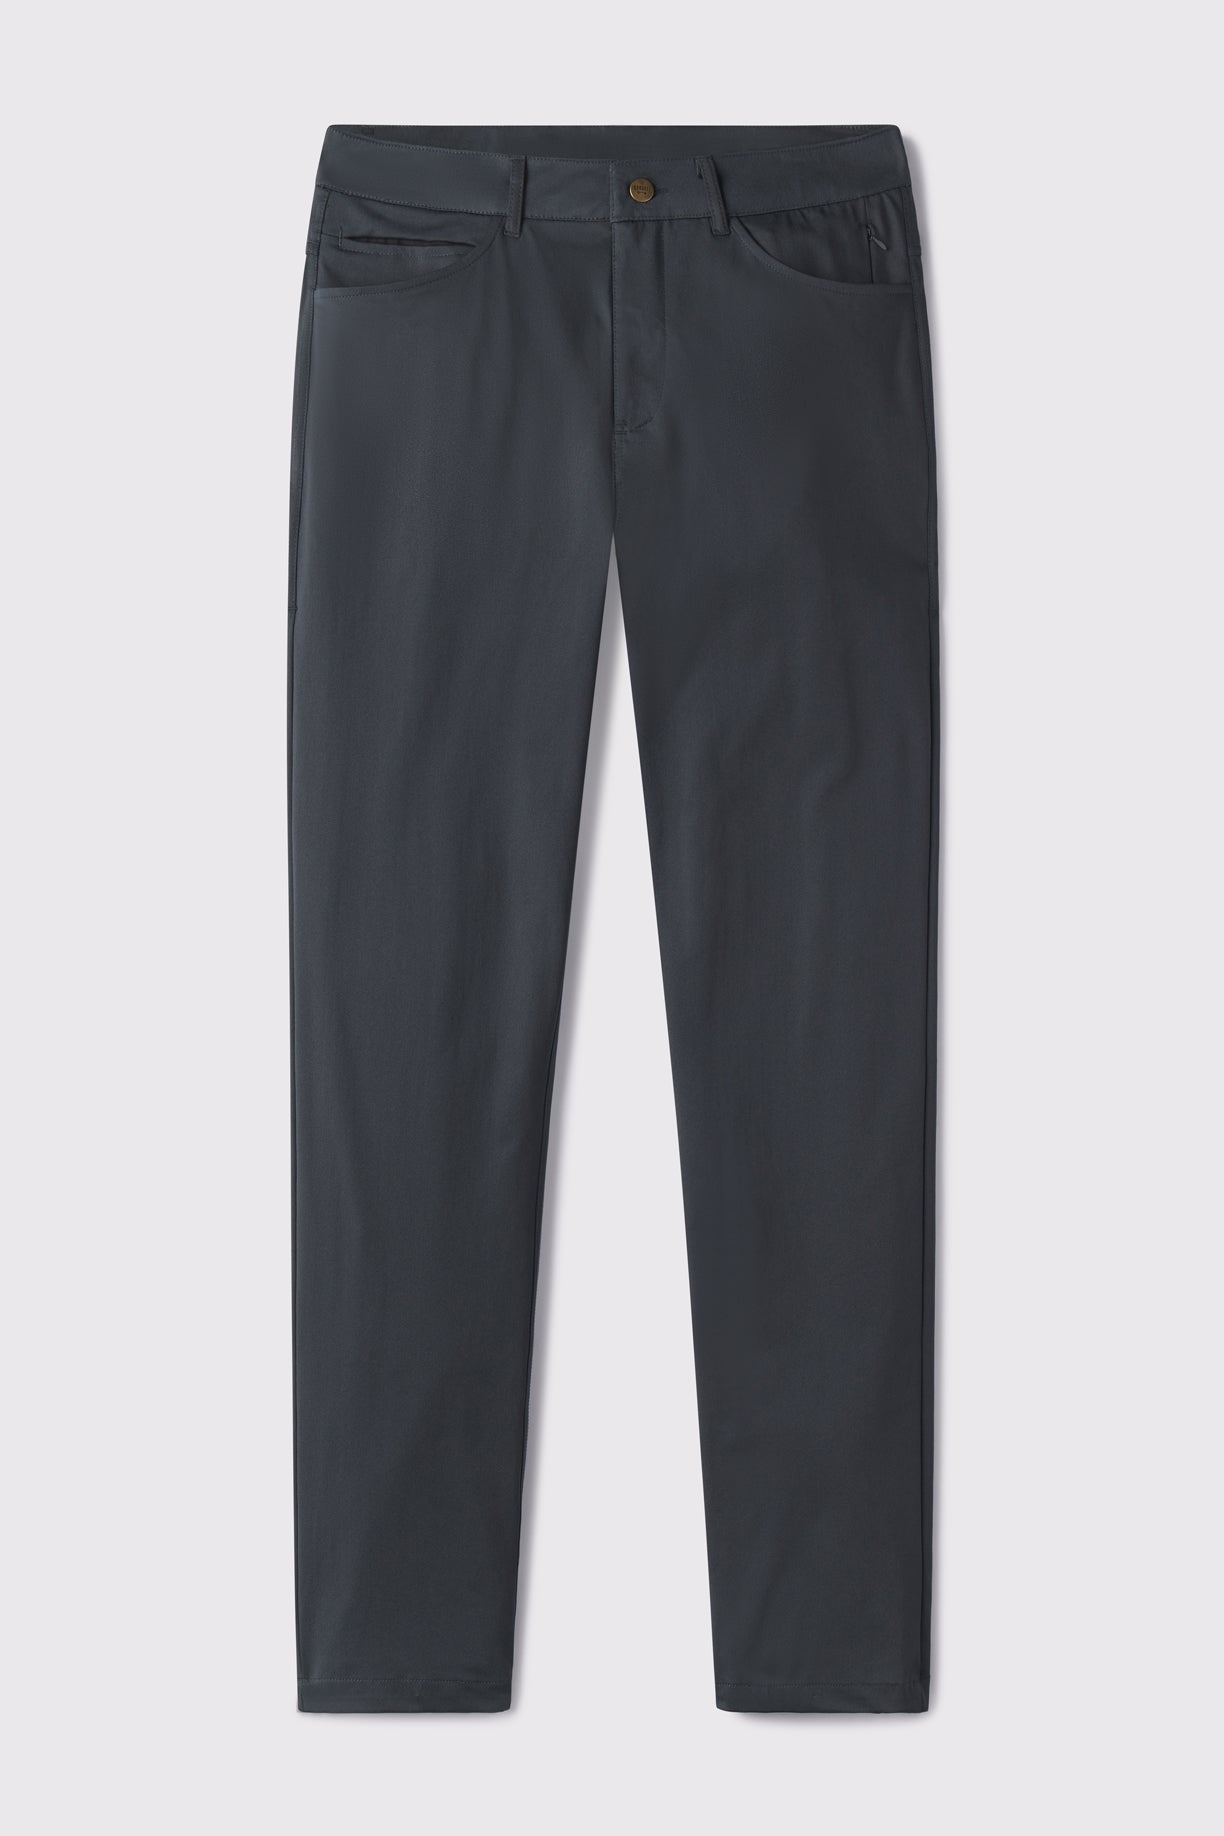 Anything Pant Slim - Charcoal - photo from front flat lay #color_charcoal